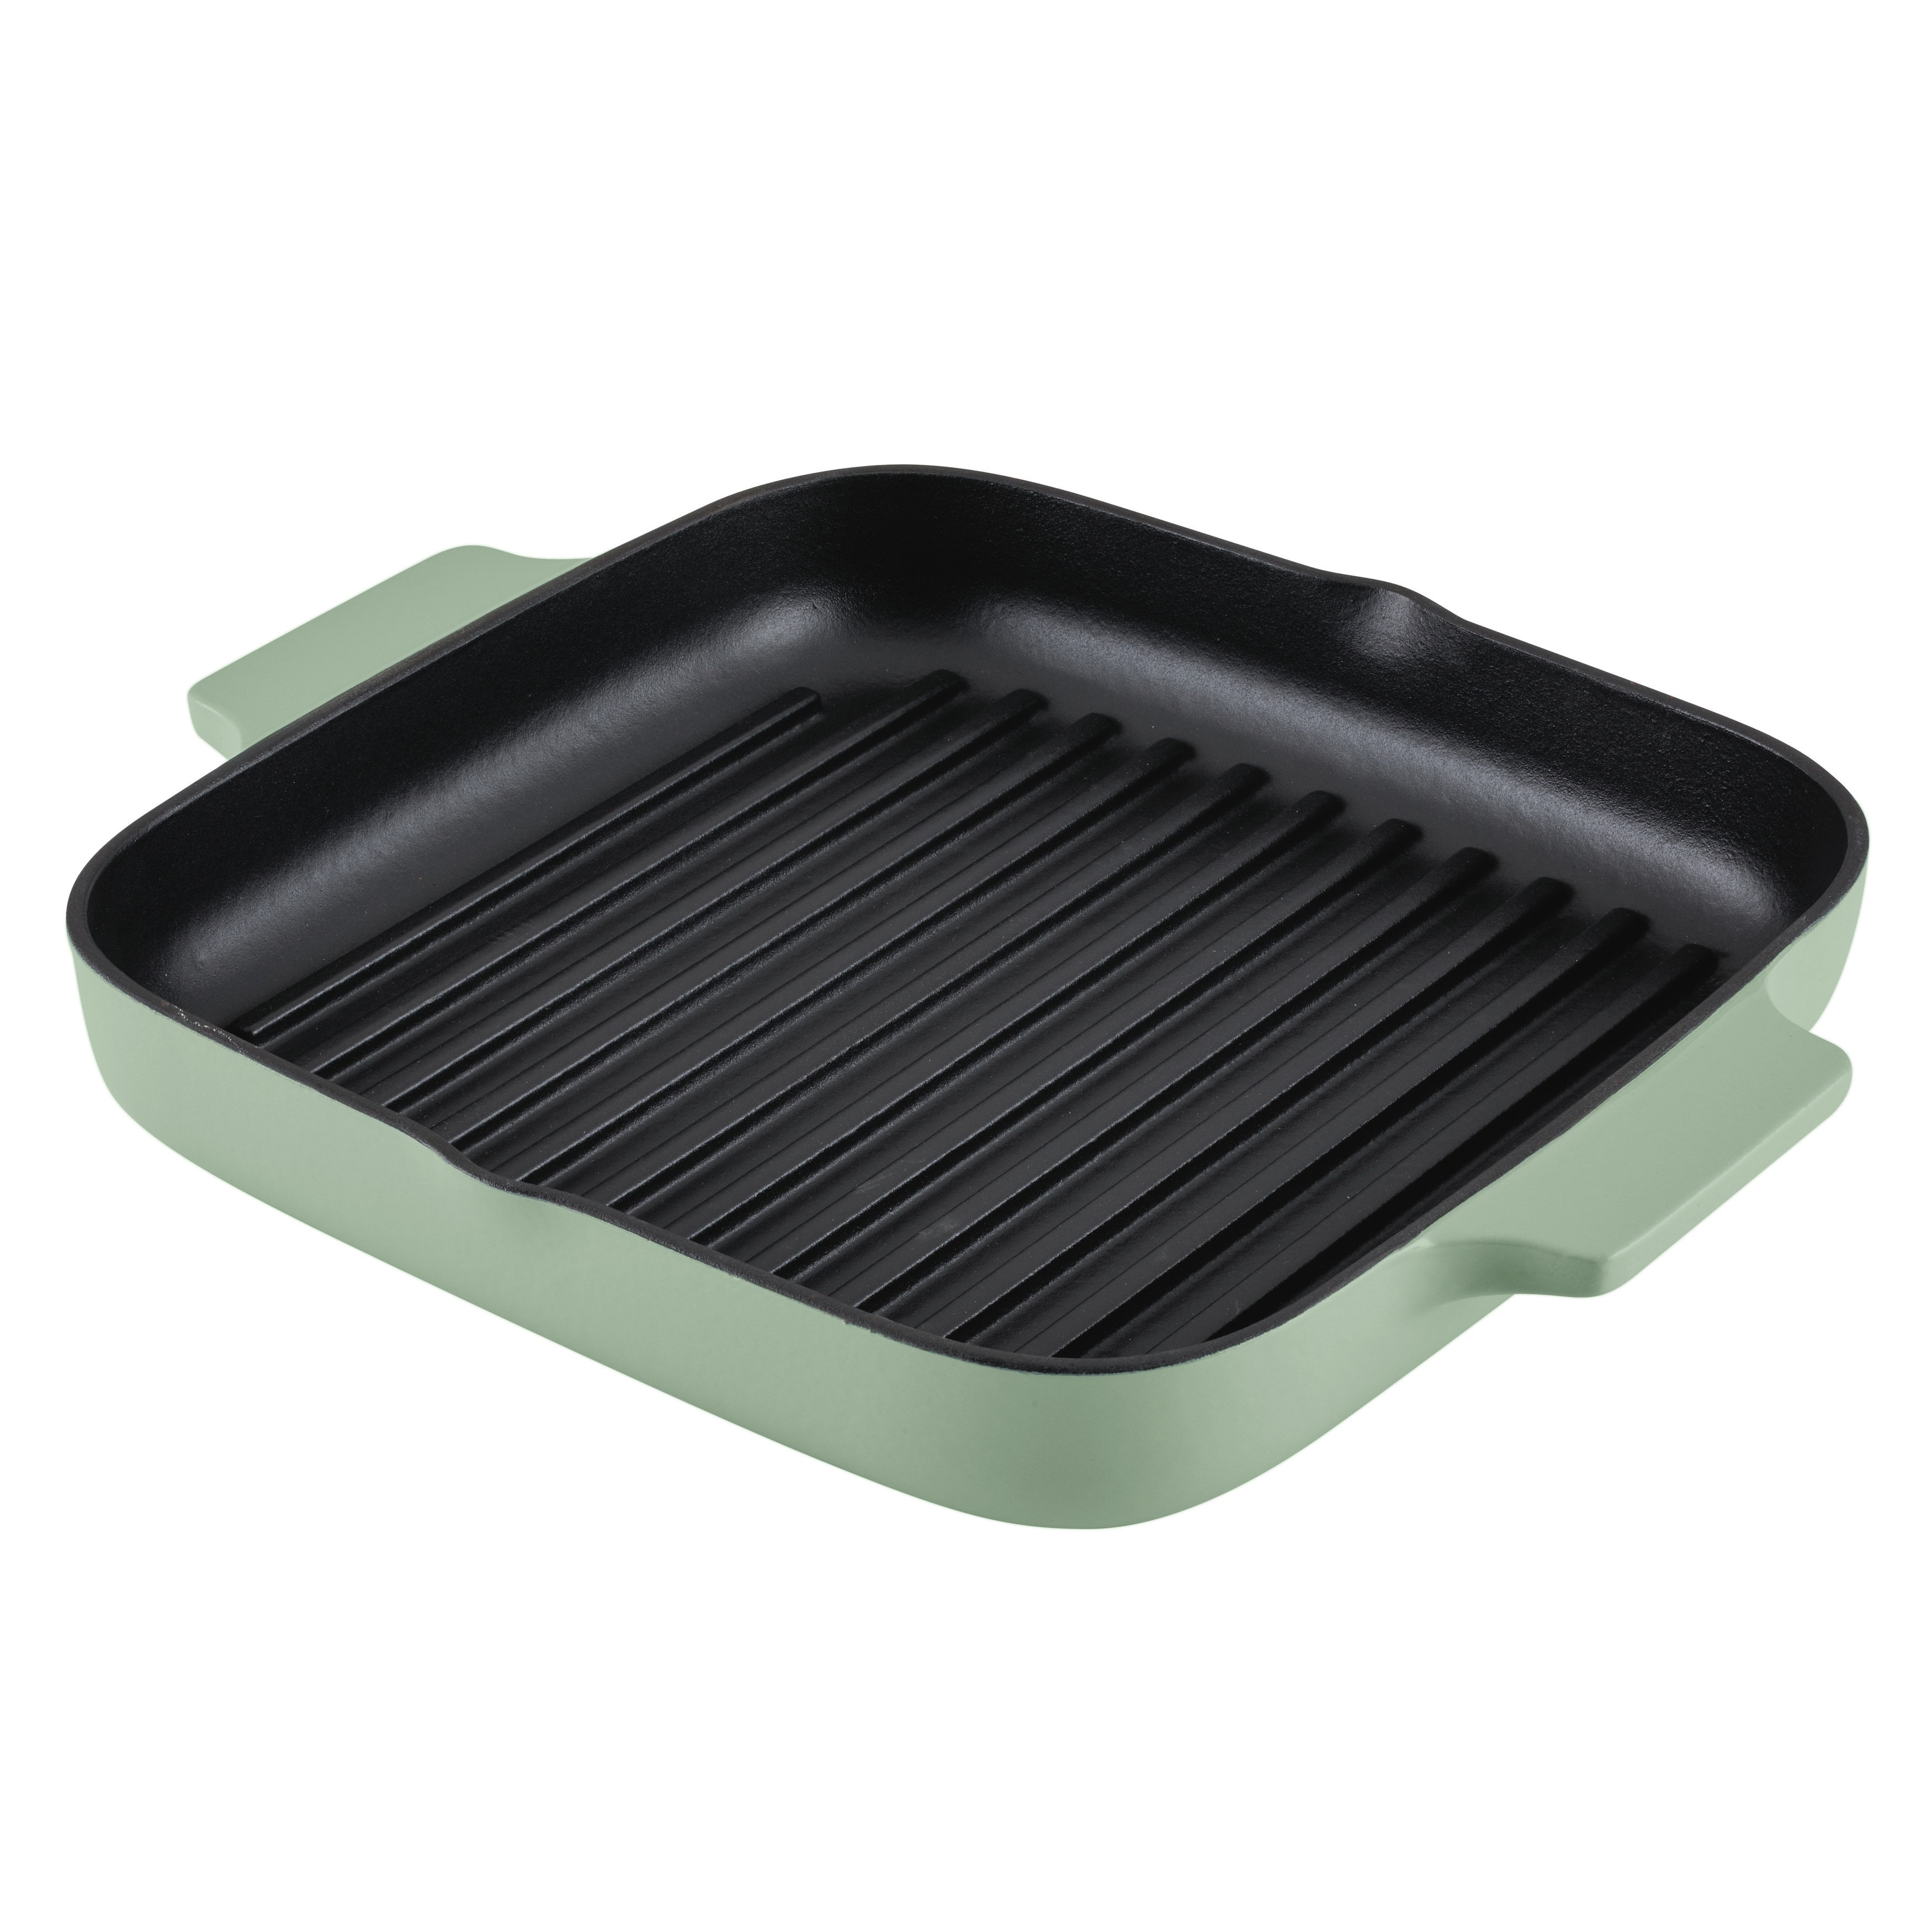 https://ak1.ostkcdn.com/images/products/is/images/direct/06ee0119ab0c35aff7cc4bc567fb6fbbf2c96643/KitchenAid-Enameled-Cast-Iron-Square-Grill-and-Roasting-Pan%2C-11-Inch%2C-Blue-Velvet.jpg